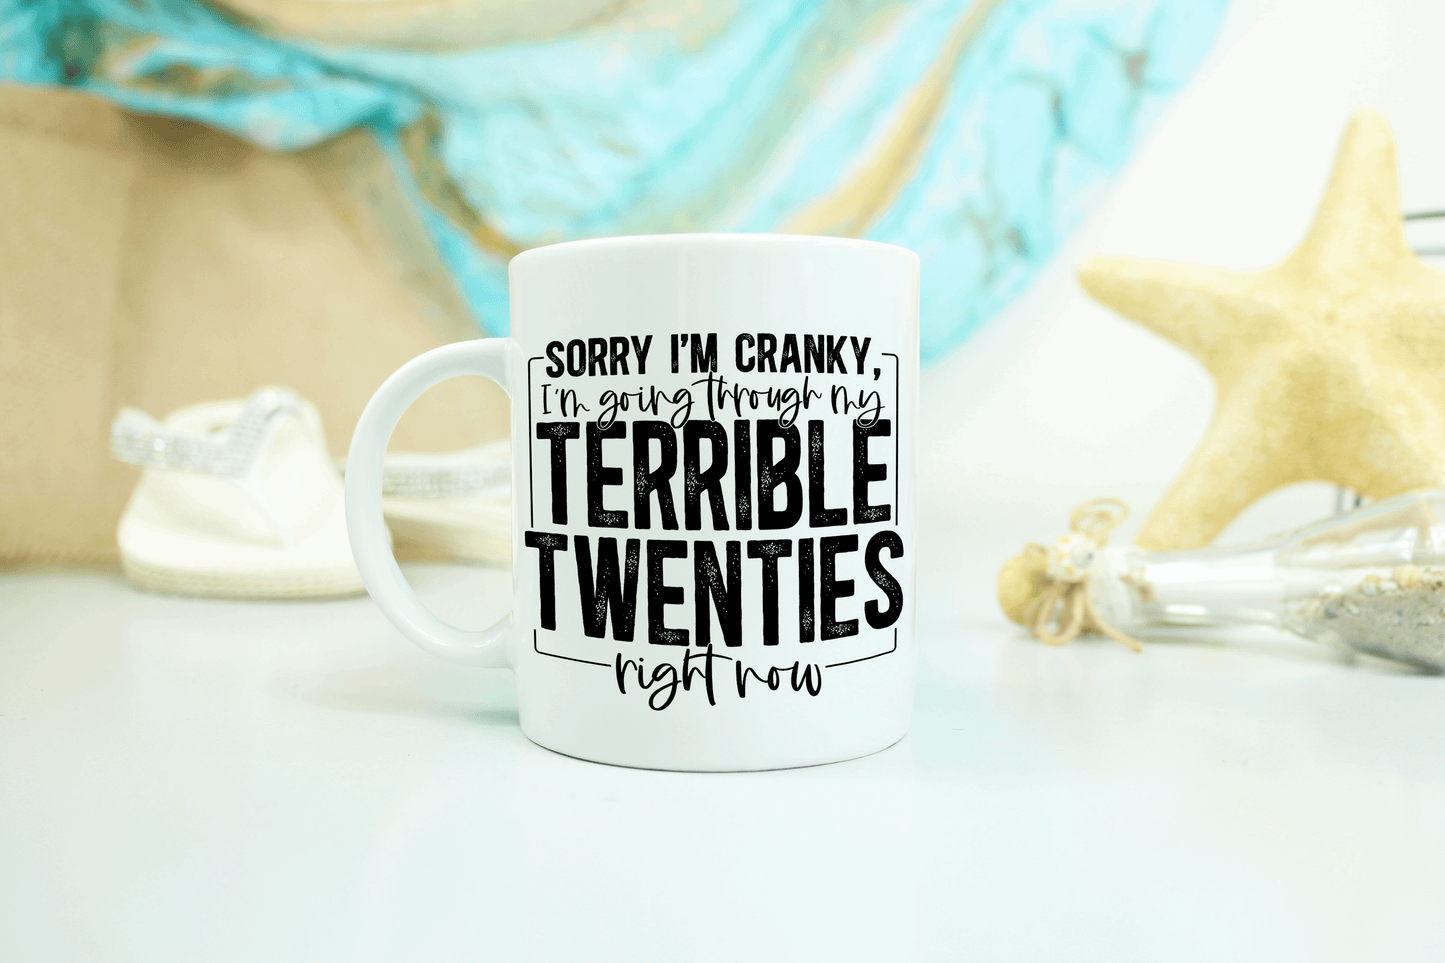  Terrible 20's or 30's Funny Coffee Mug by Free Spirit Accessories sold by Free Spirit Accessories